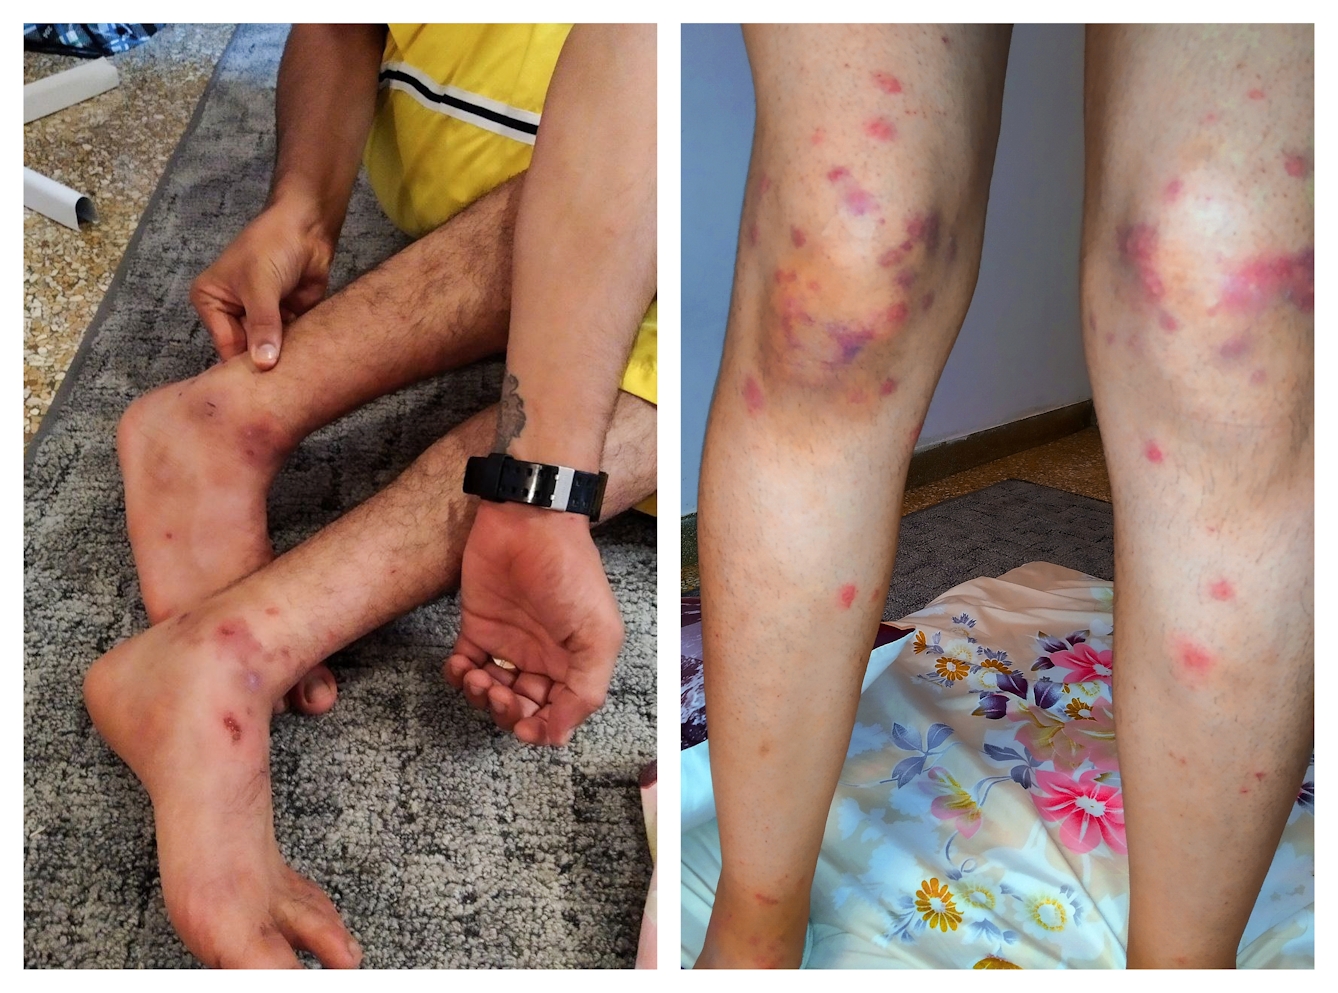 Photographic diptych showing on the left a man's legs and on the right a woman's legs. Both images show injury to the legs in the form of cuts, bruises and swellings.